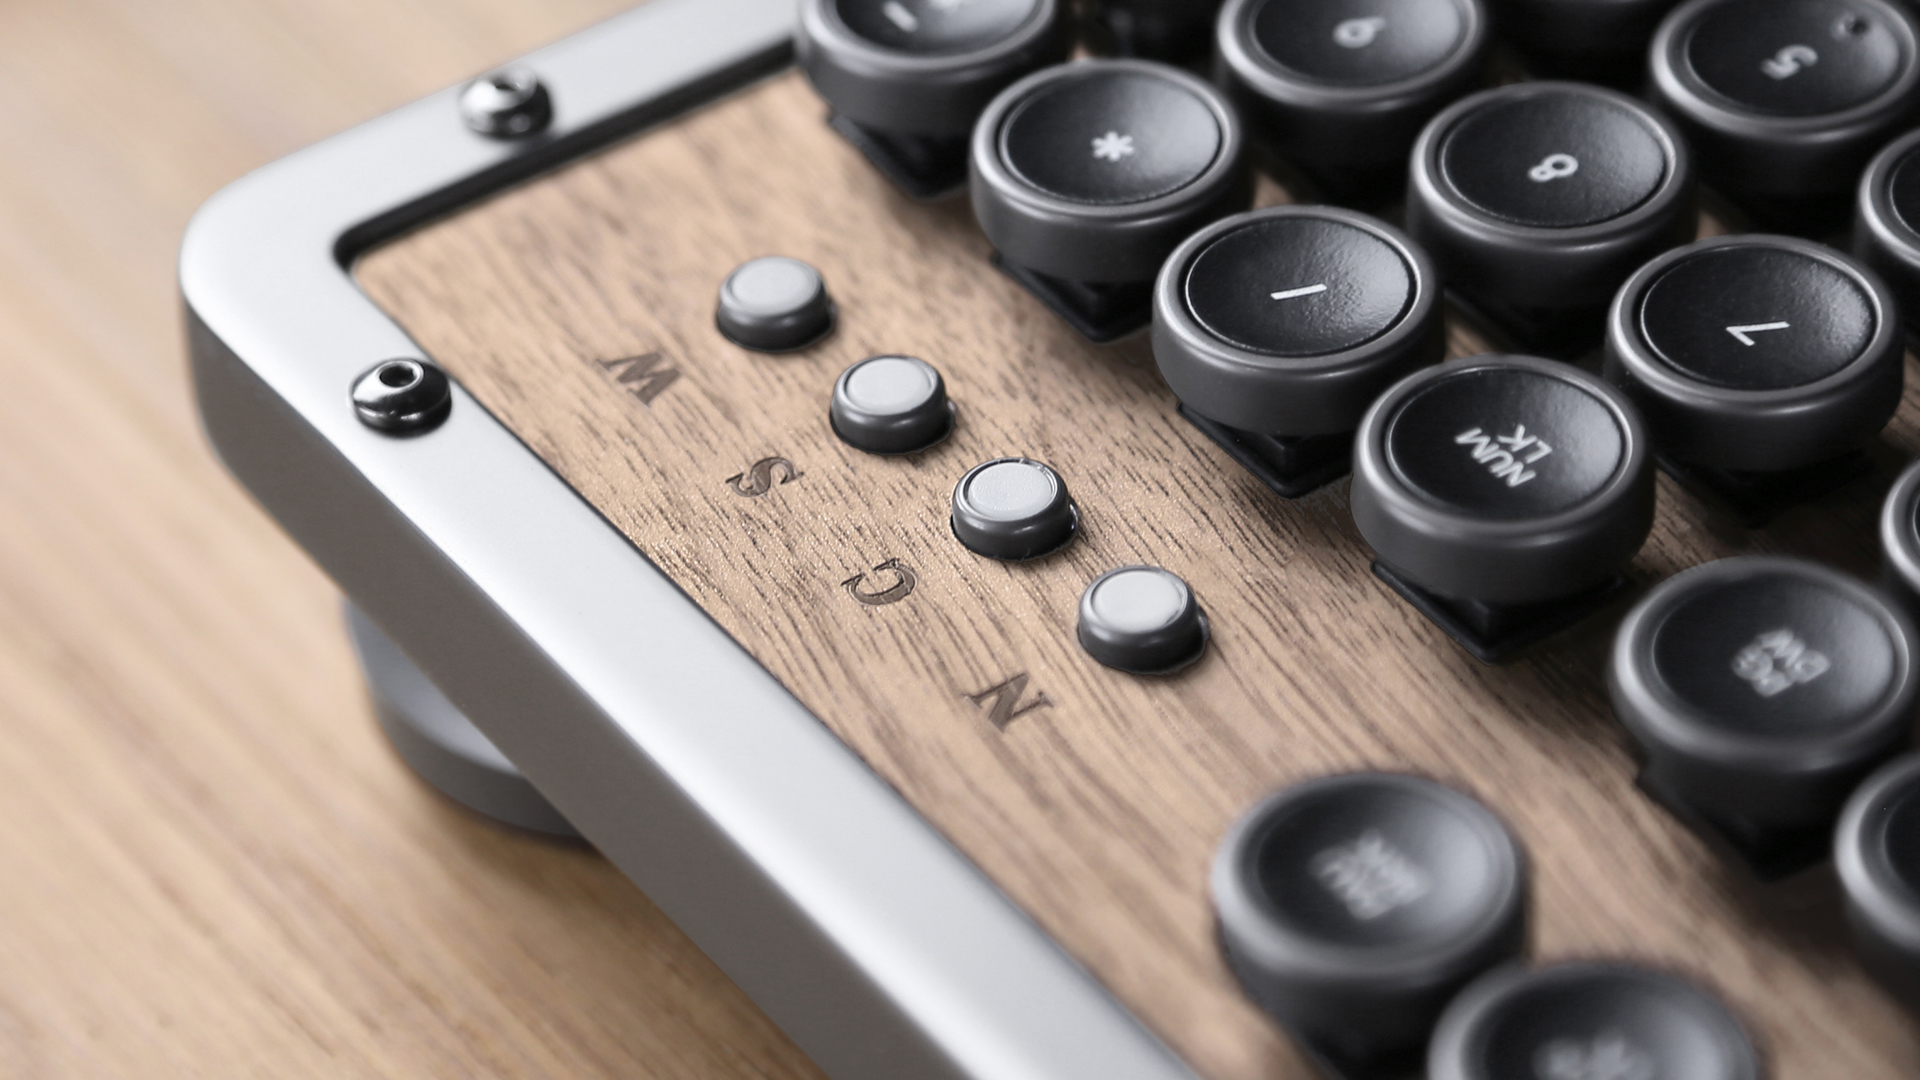 Azio Ships Retro Classic Bluetooth Keyboard: Expensive Luxury for